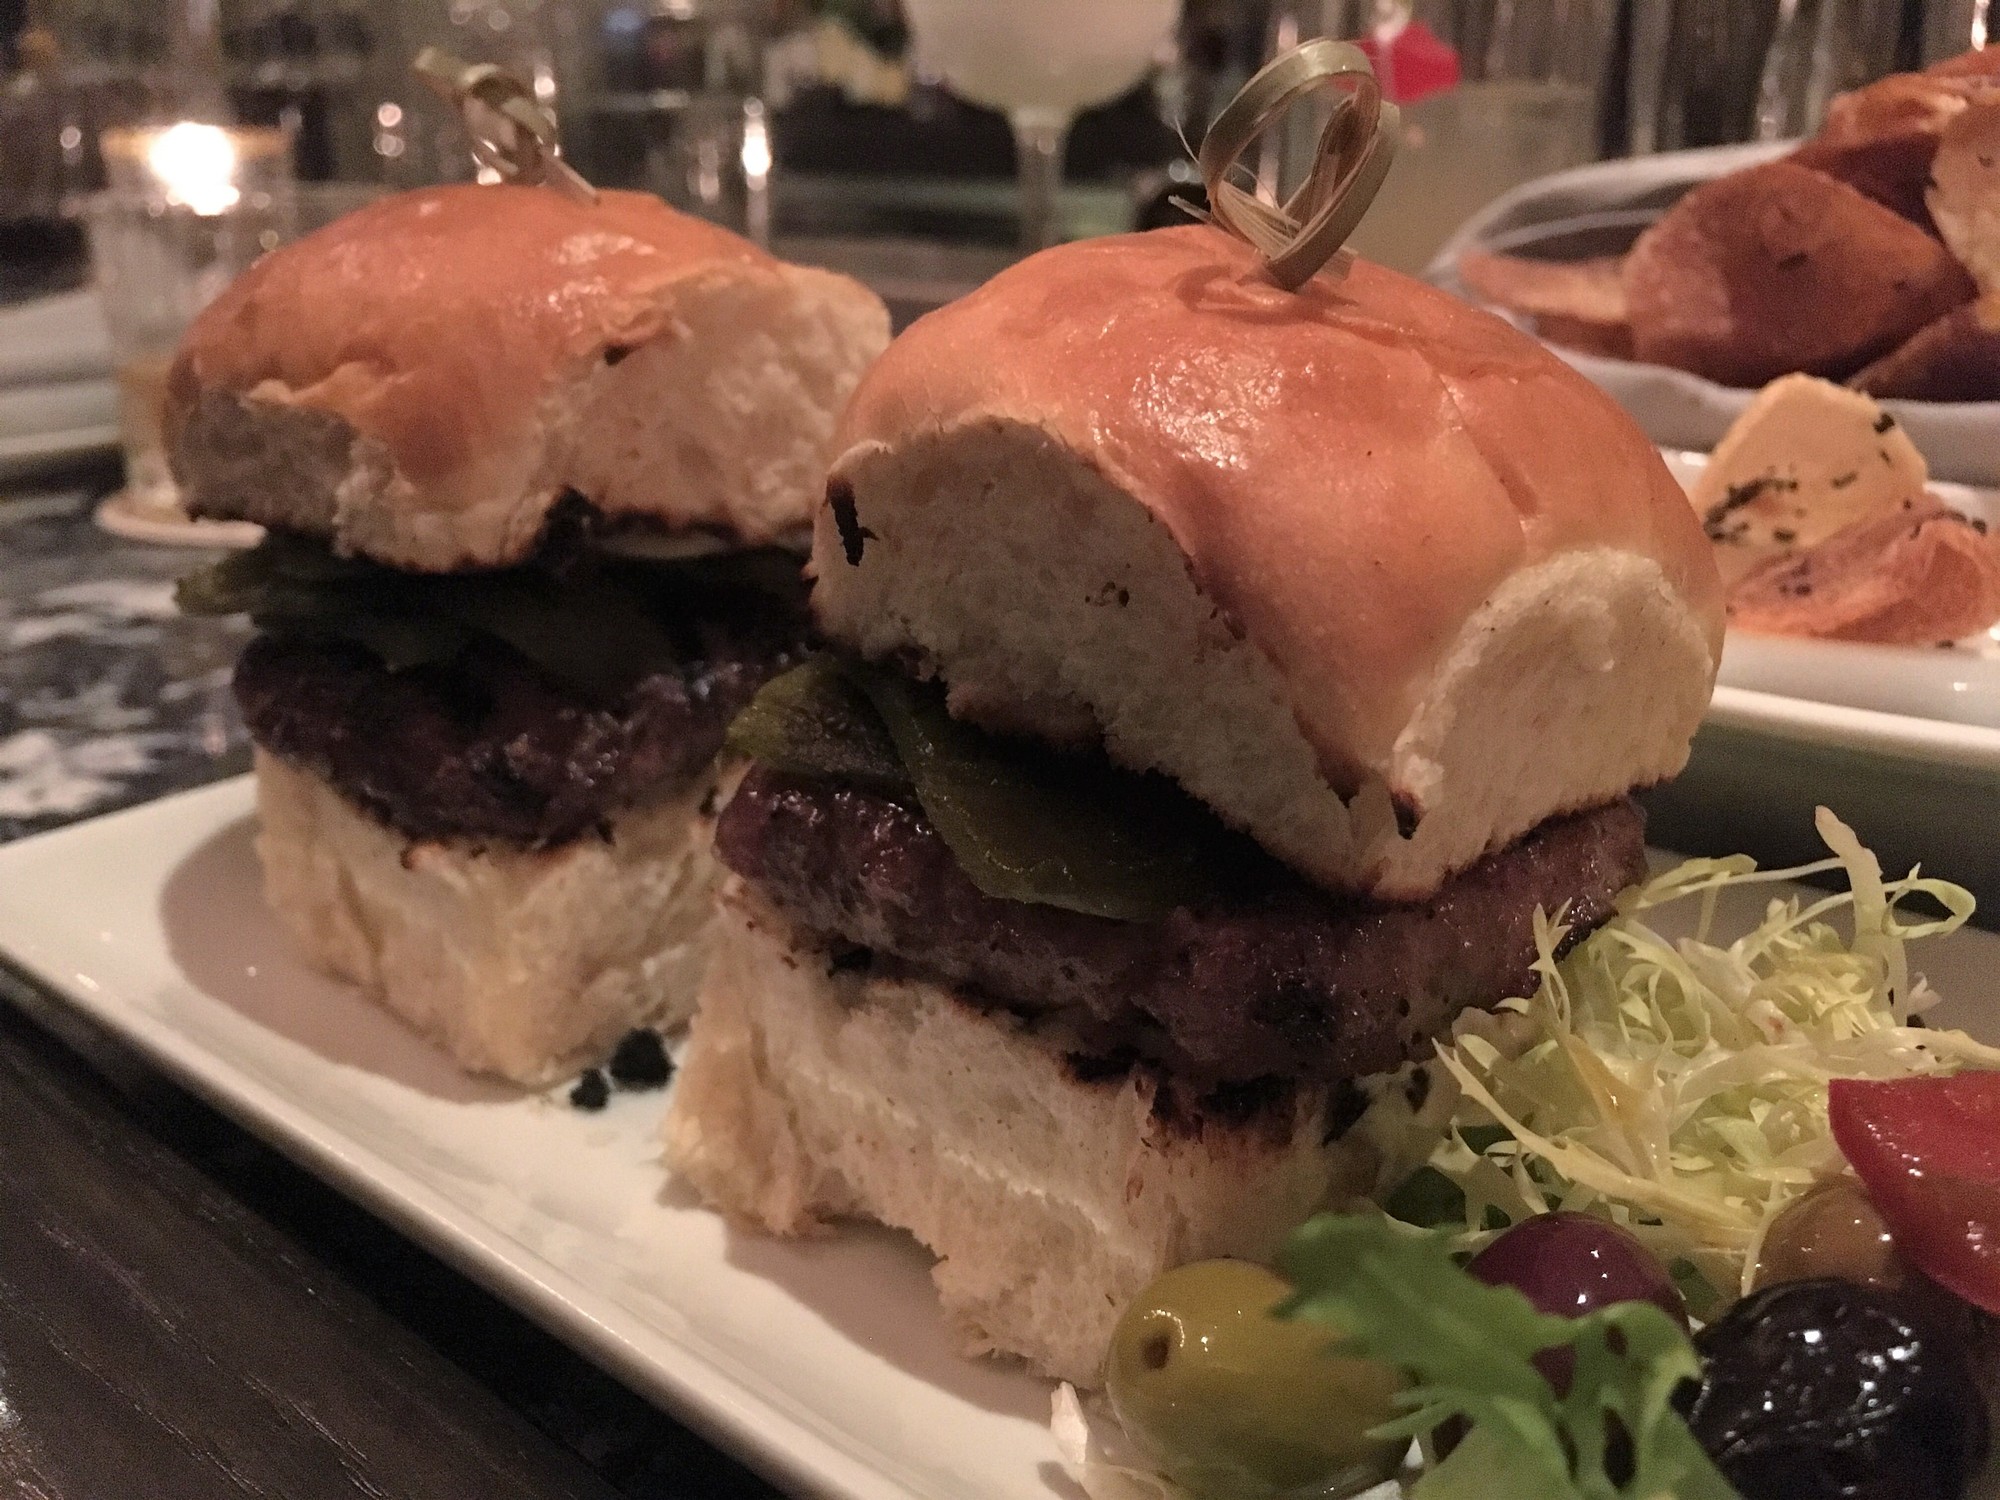 The lamb burgers at P.S. Steak pay tribute to those from La Belle Vie.